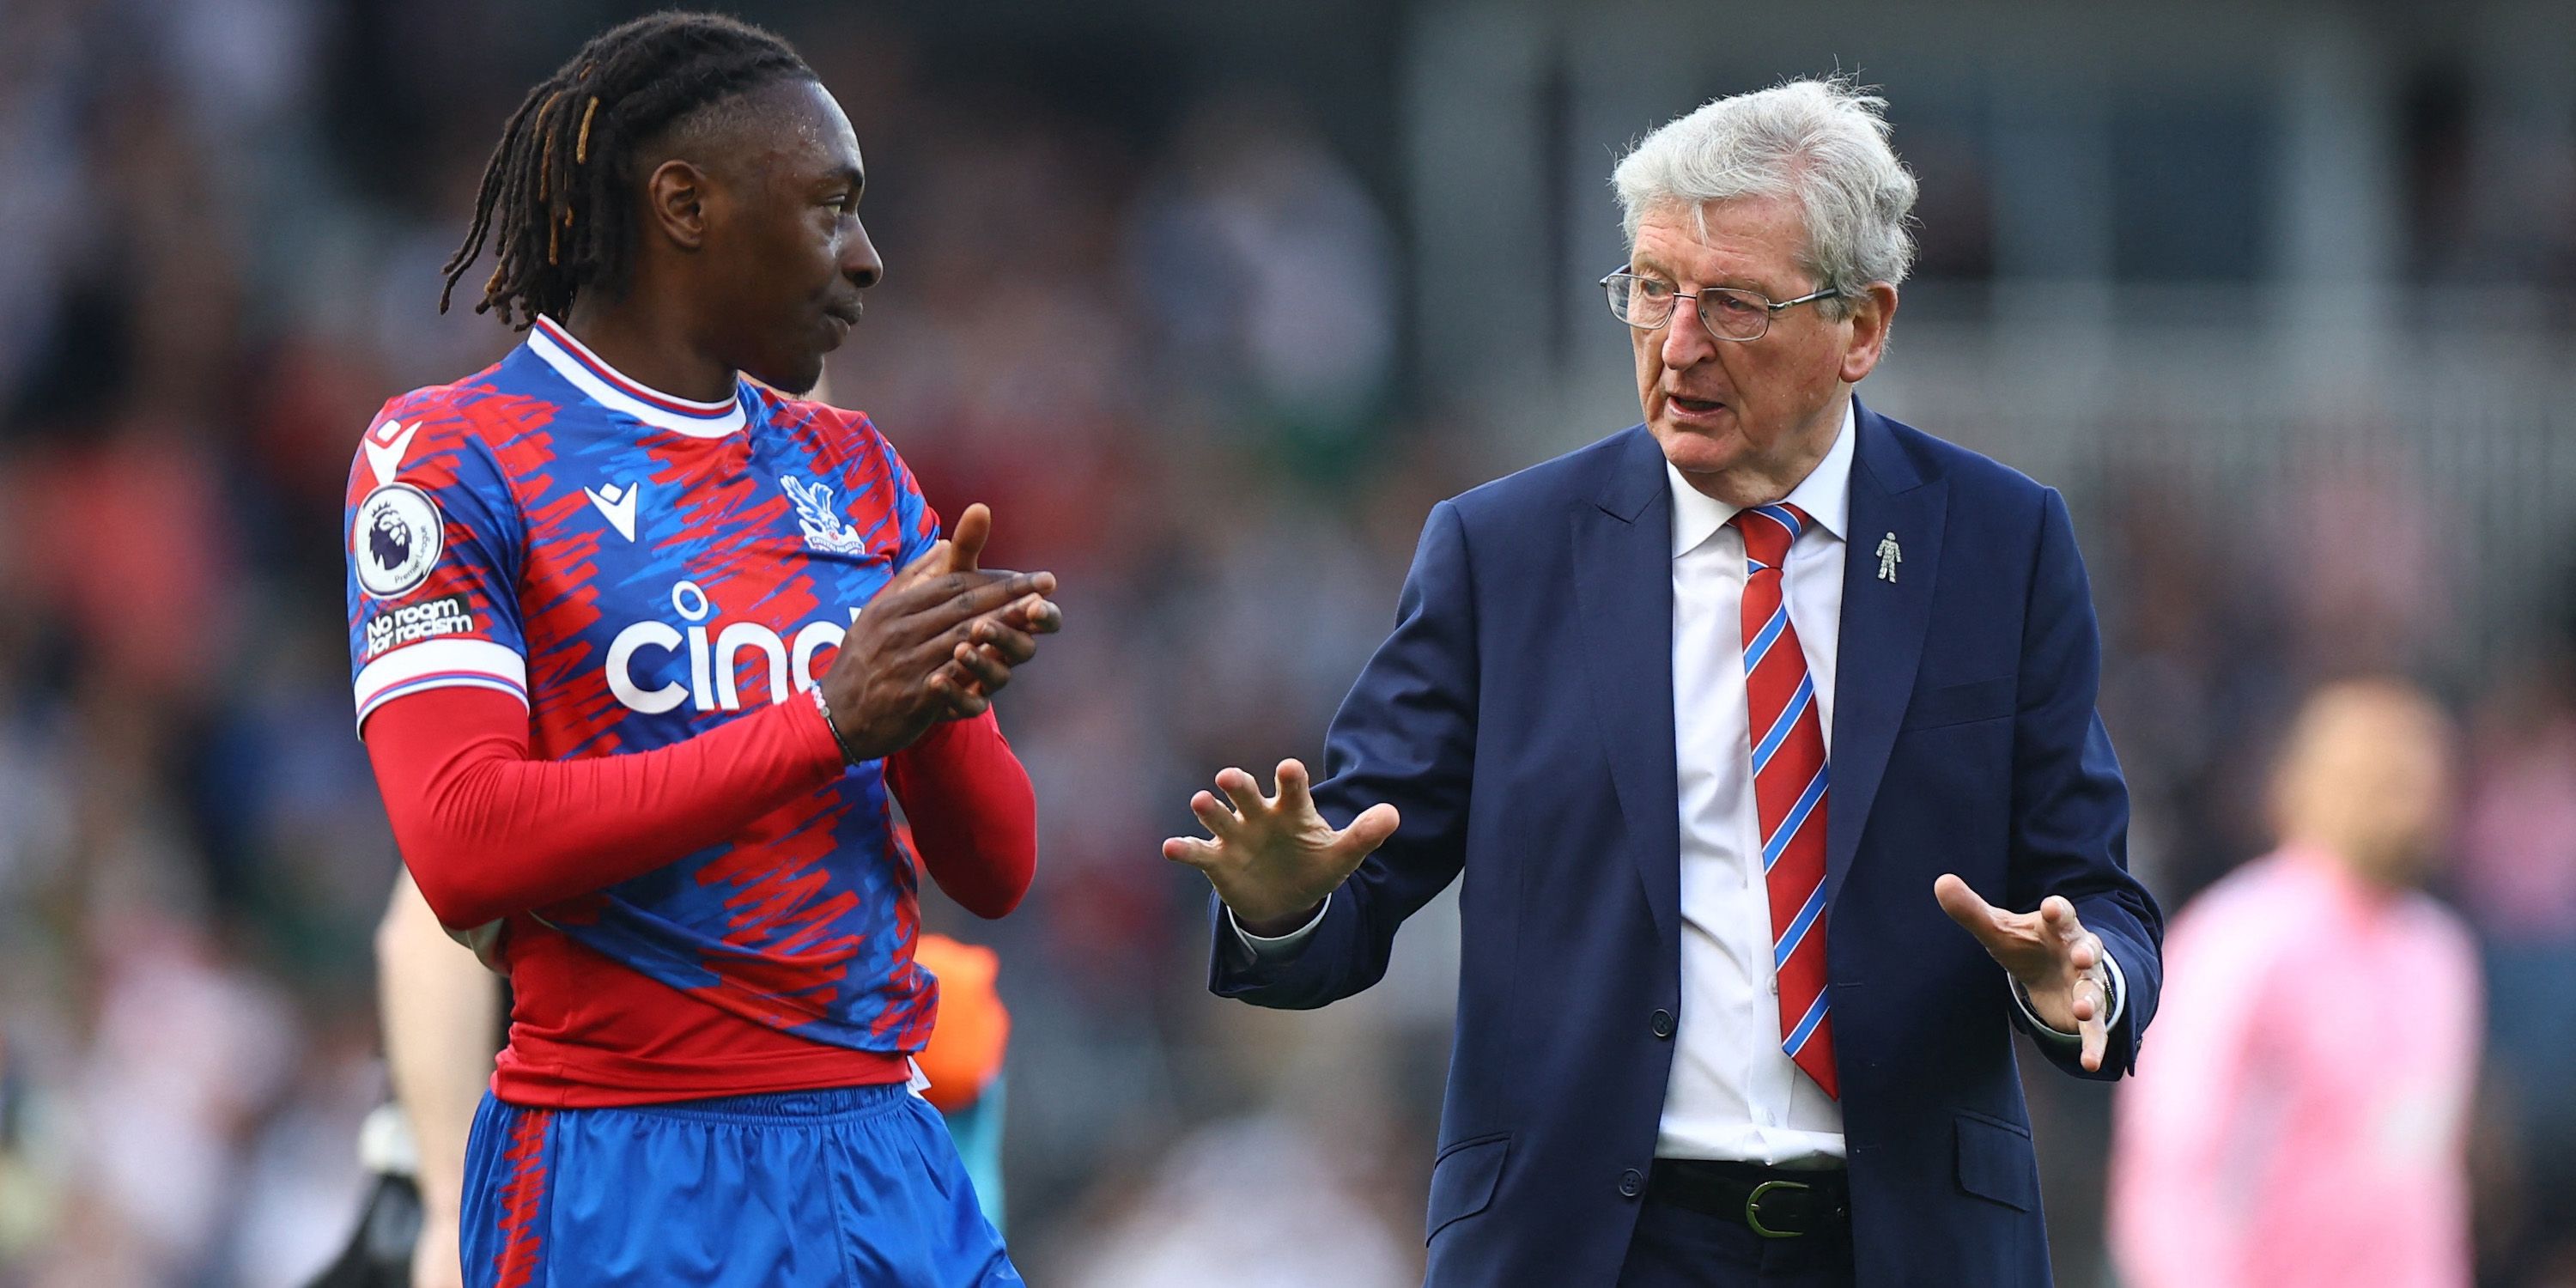 Crystal Palace manager Roy Hodgson with Eberechi Eze after the match